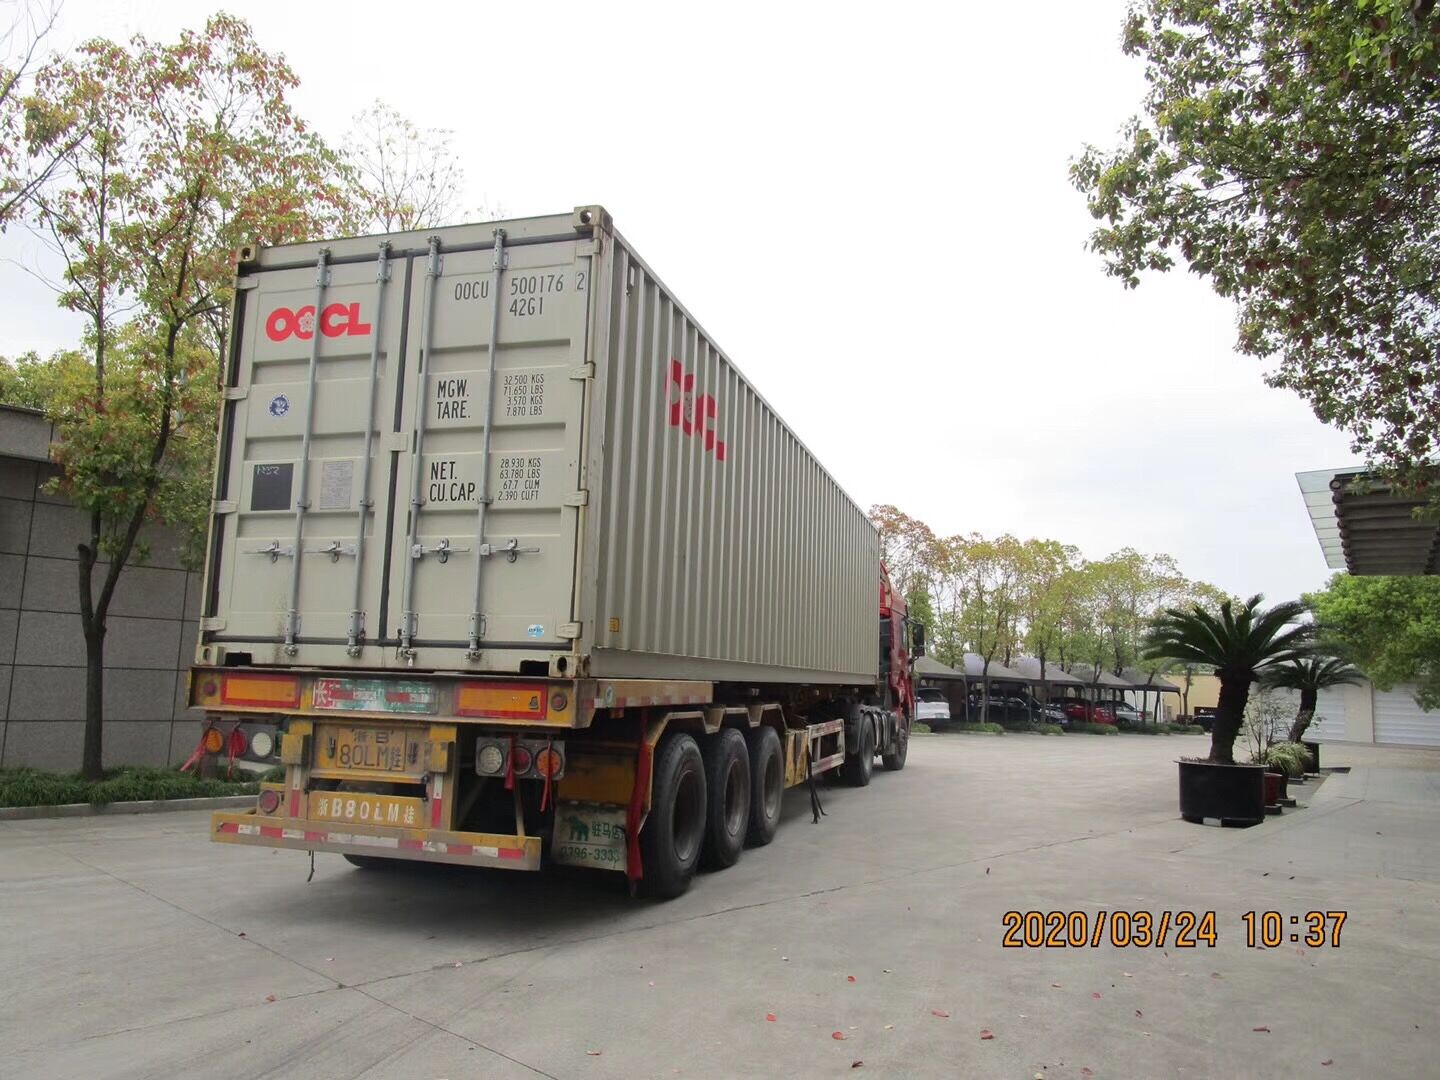 roll forming machine delivered to Mexico